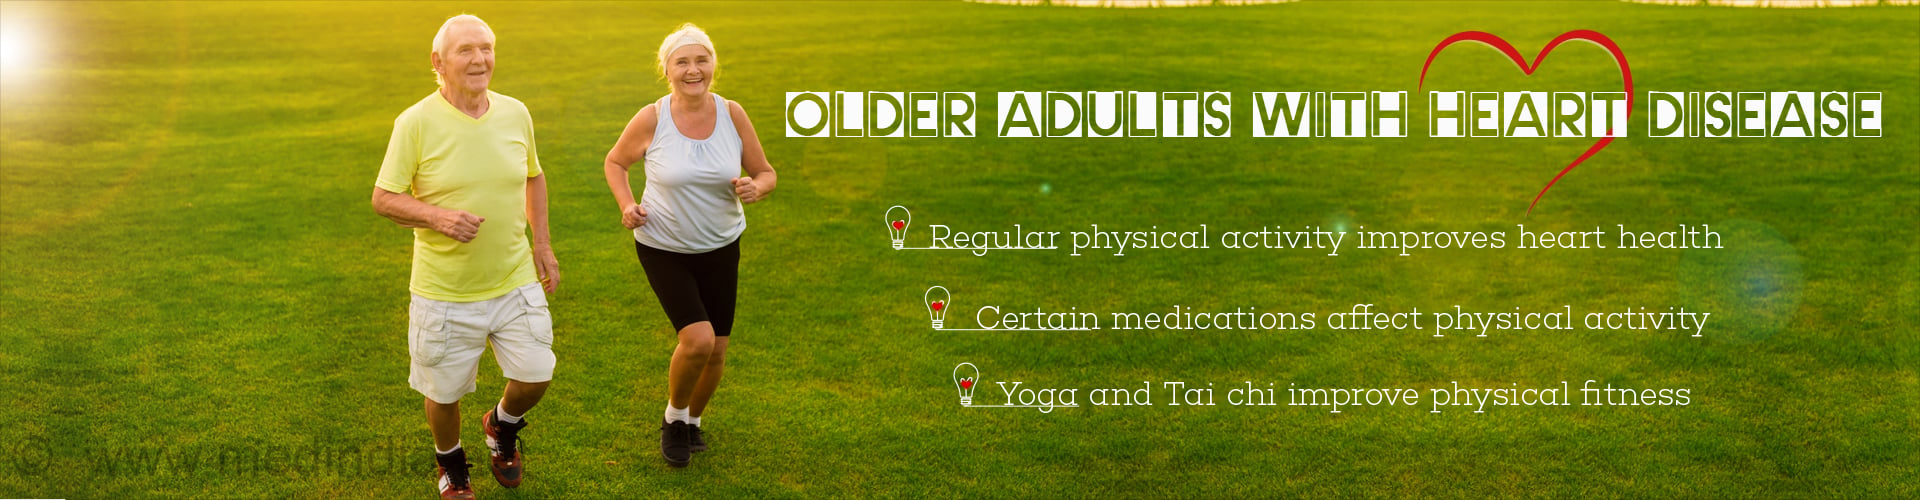 Older adults with heart disease
- Regular physical activity improves heart health
- Certain medications affect physical activity
- Yoga and Tai Chi improve physical fitness